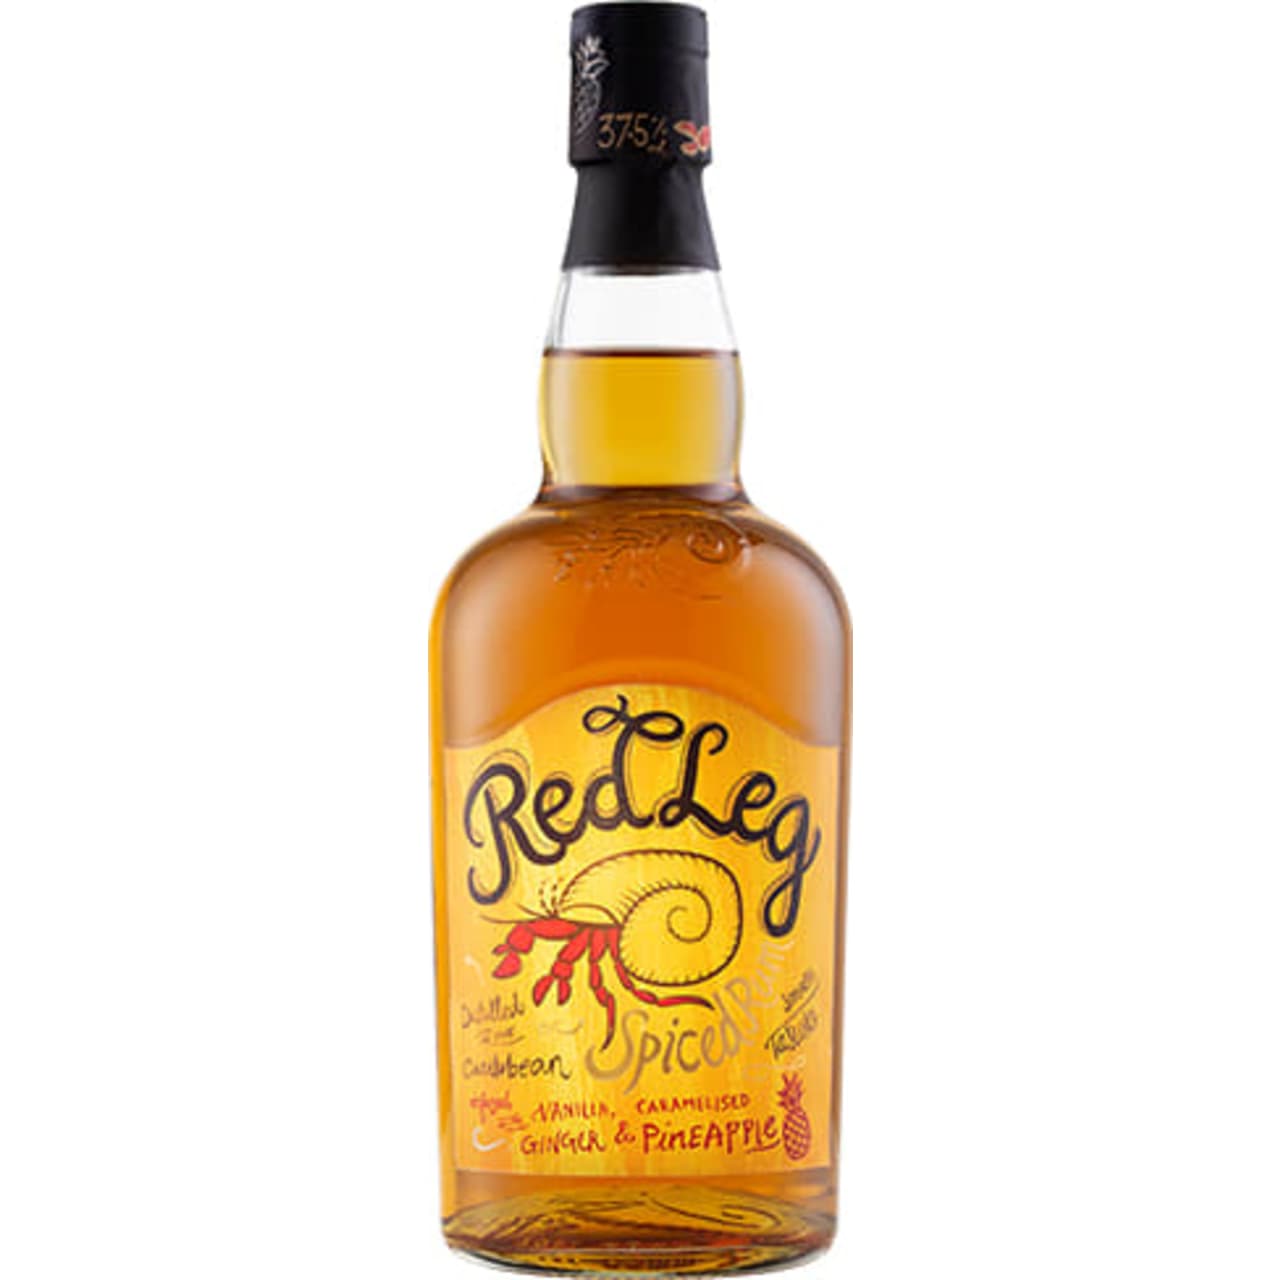 A delicious spiced rum from RedLeg, this expression is infused with vanilla, Jamaican ginger and caramelised pineapple